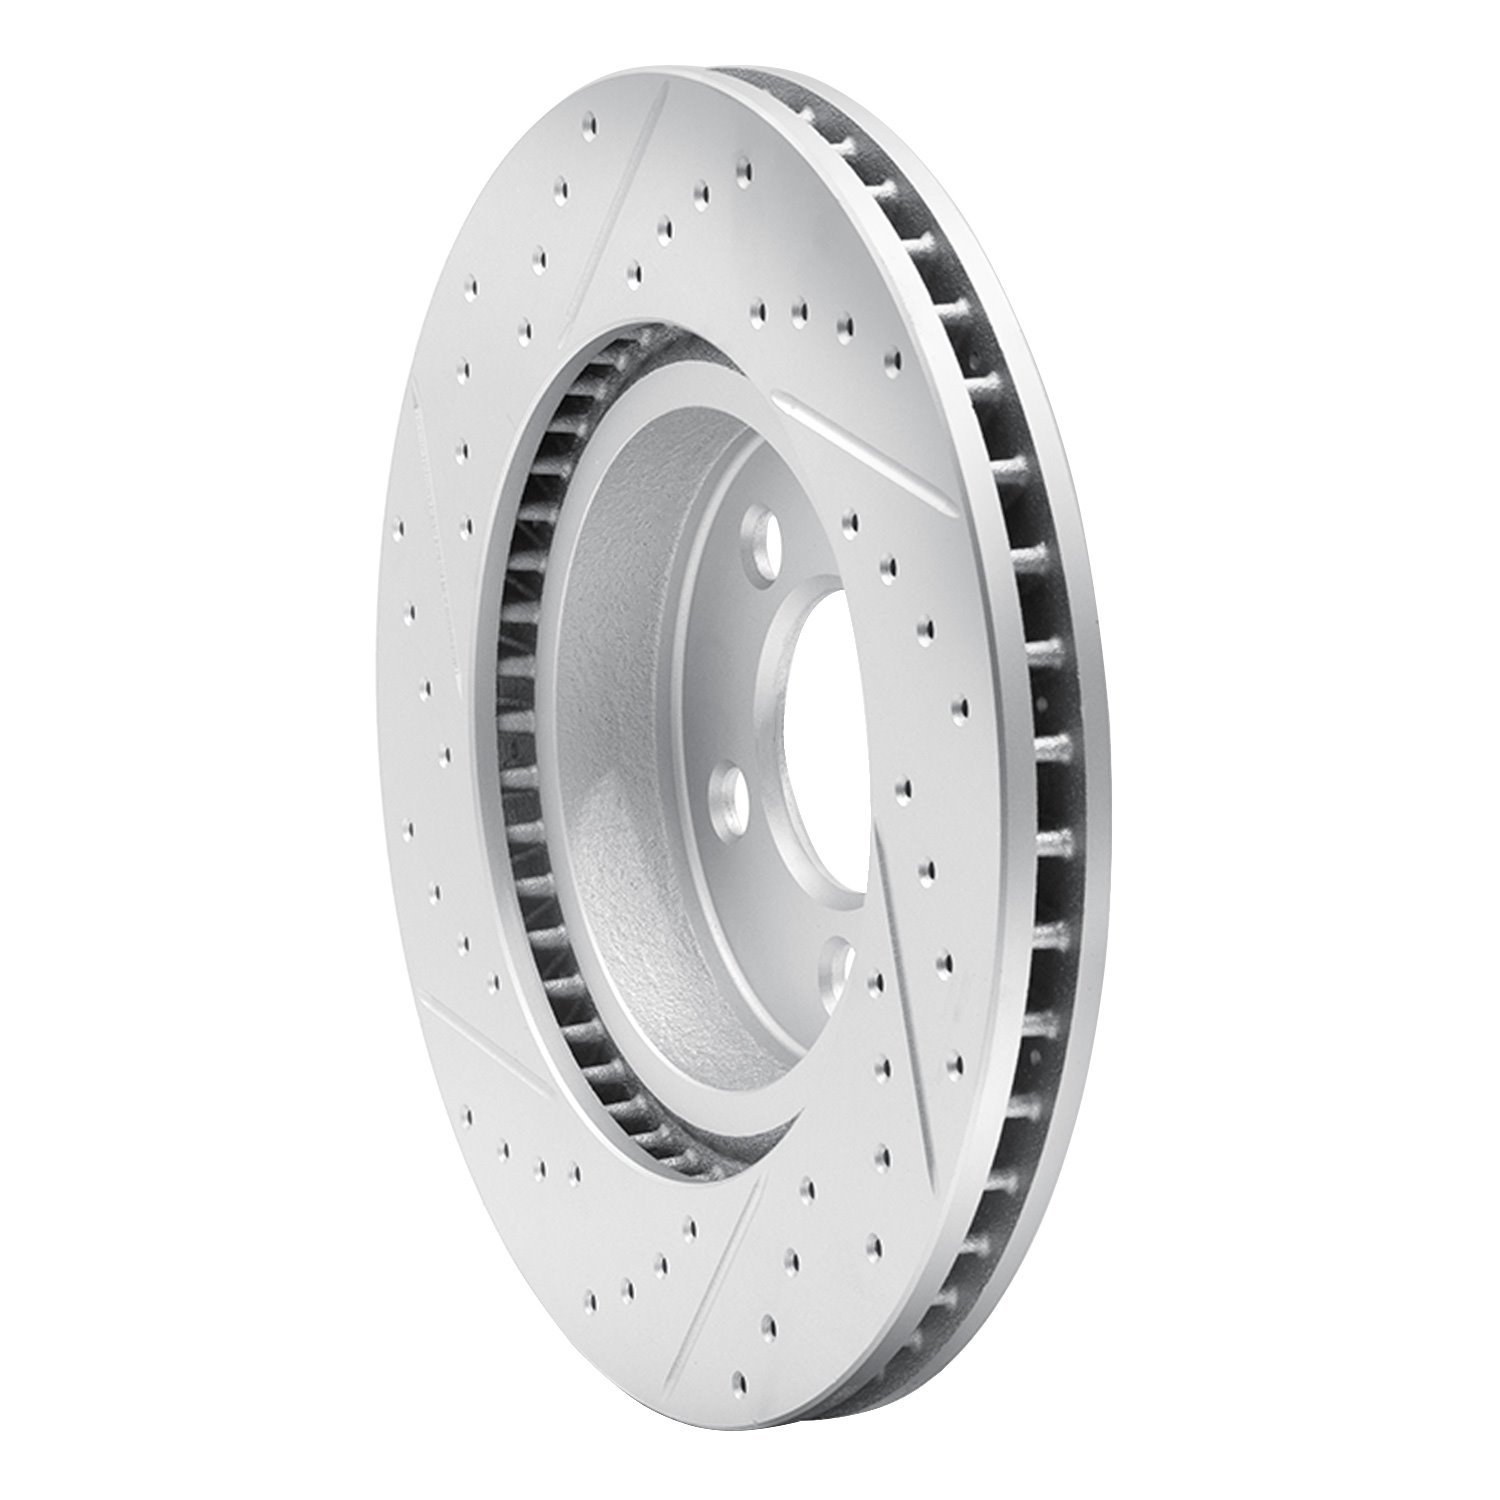 830-39015R Geoperformance Drilled/Slotted Brake Rotor, Fits Select Mopar, Position: Front Right